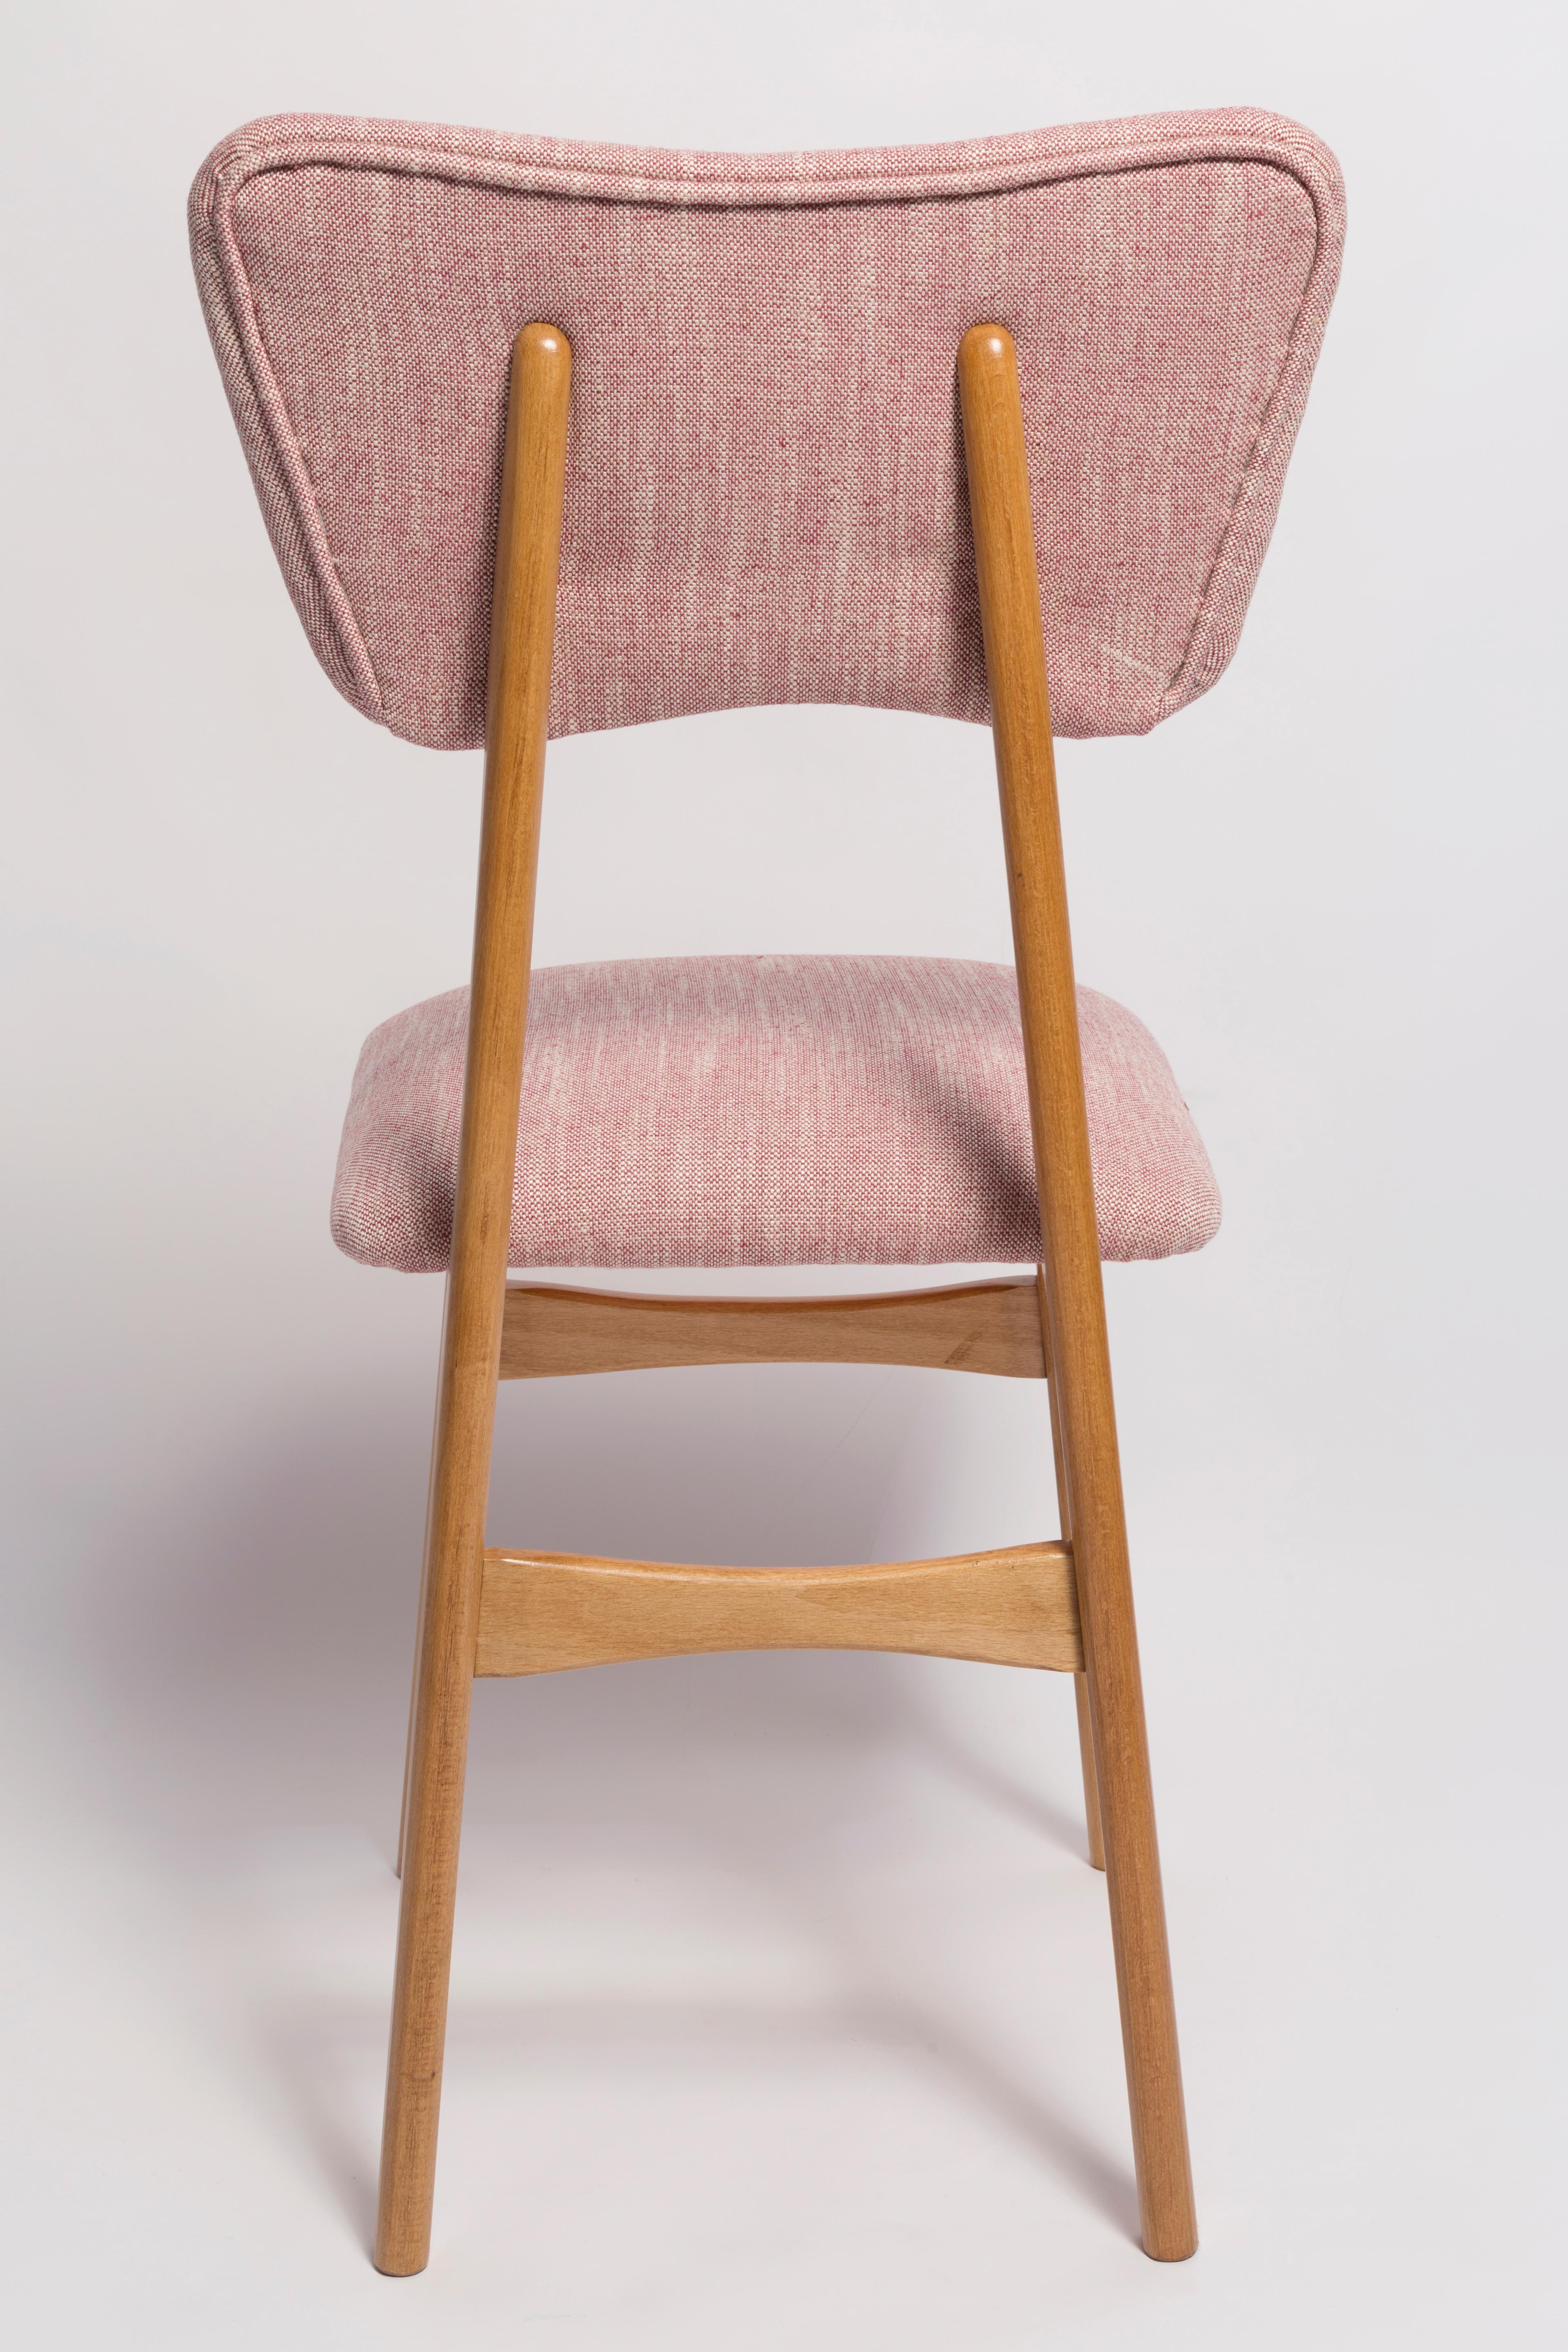 Six Mid-Century Butterfly Dining Chairs, Pink Linen, Light Wood, Europe, 1960s For Sale 2